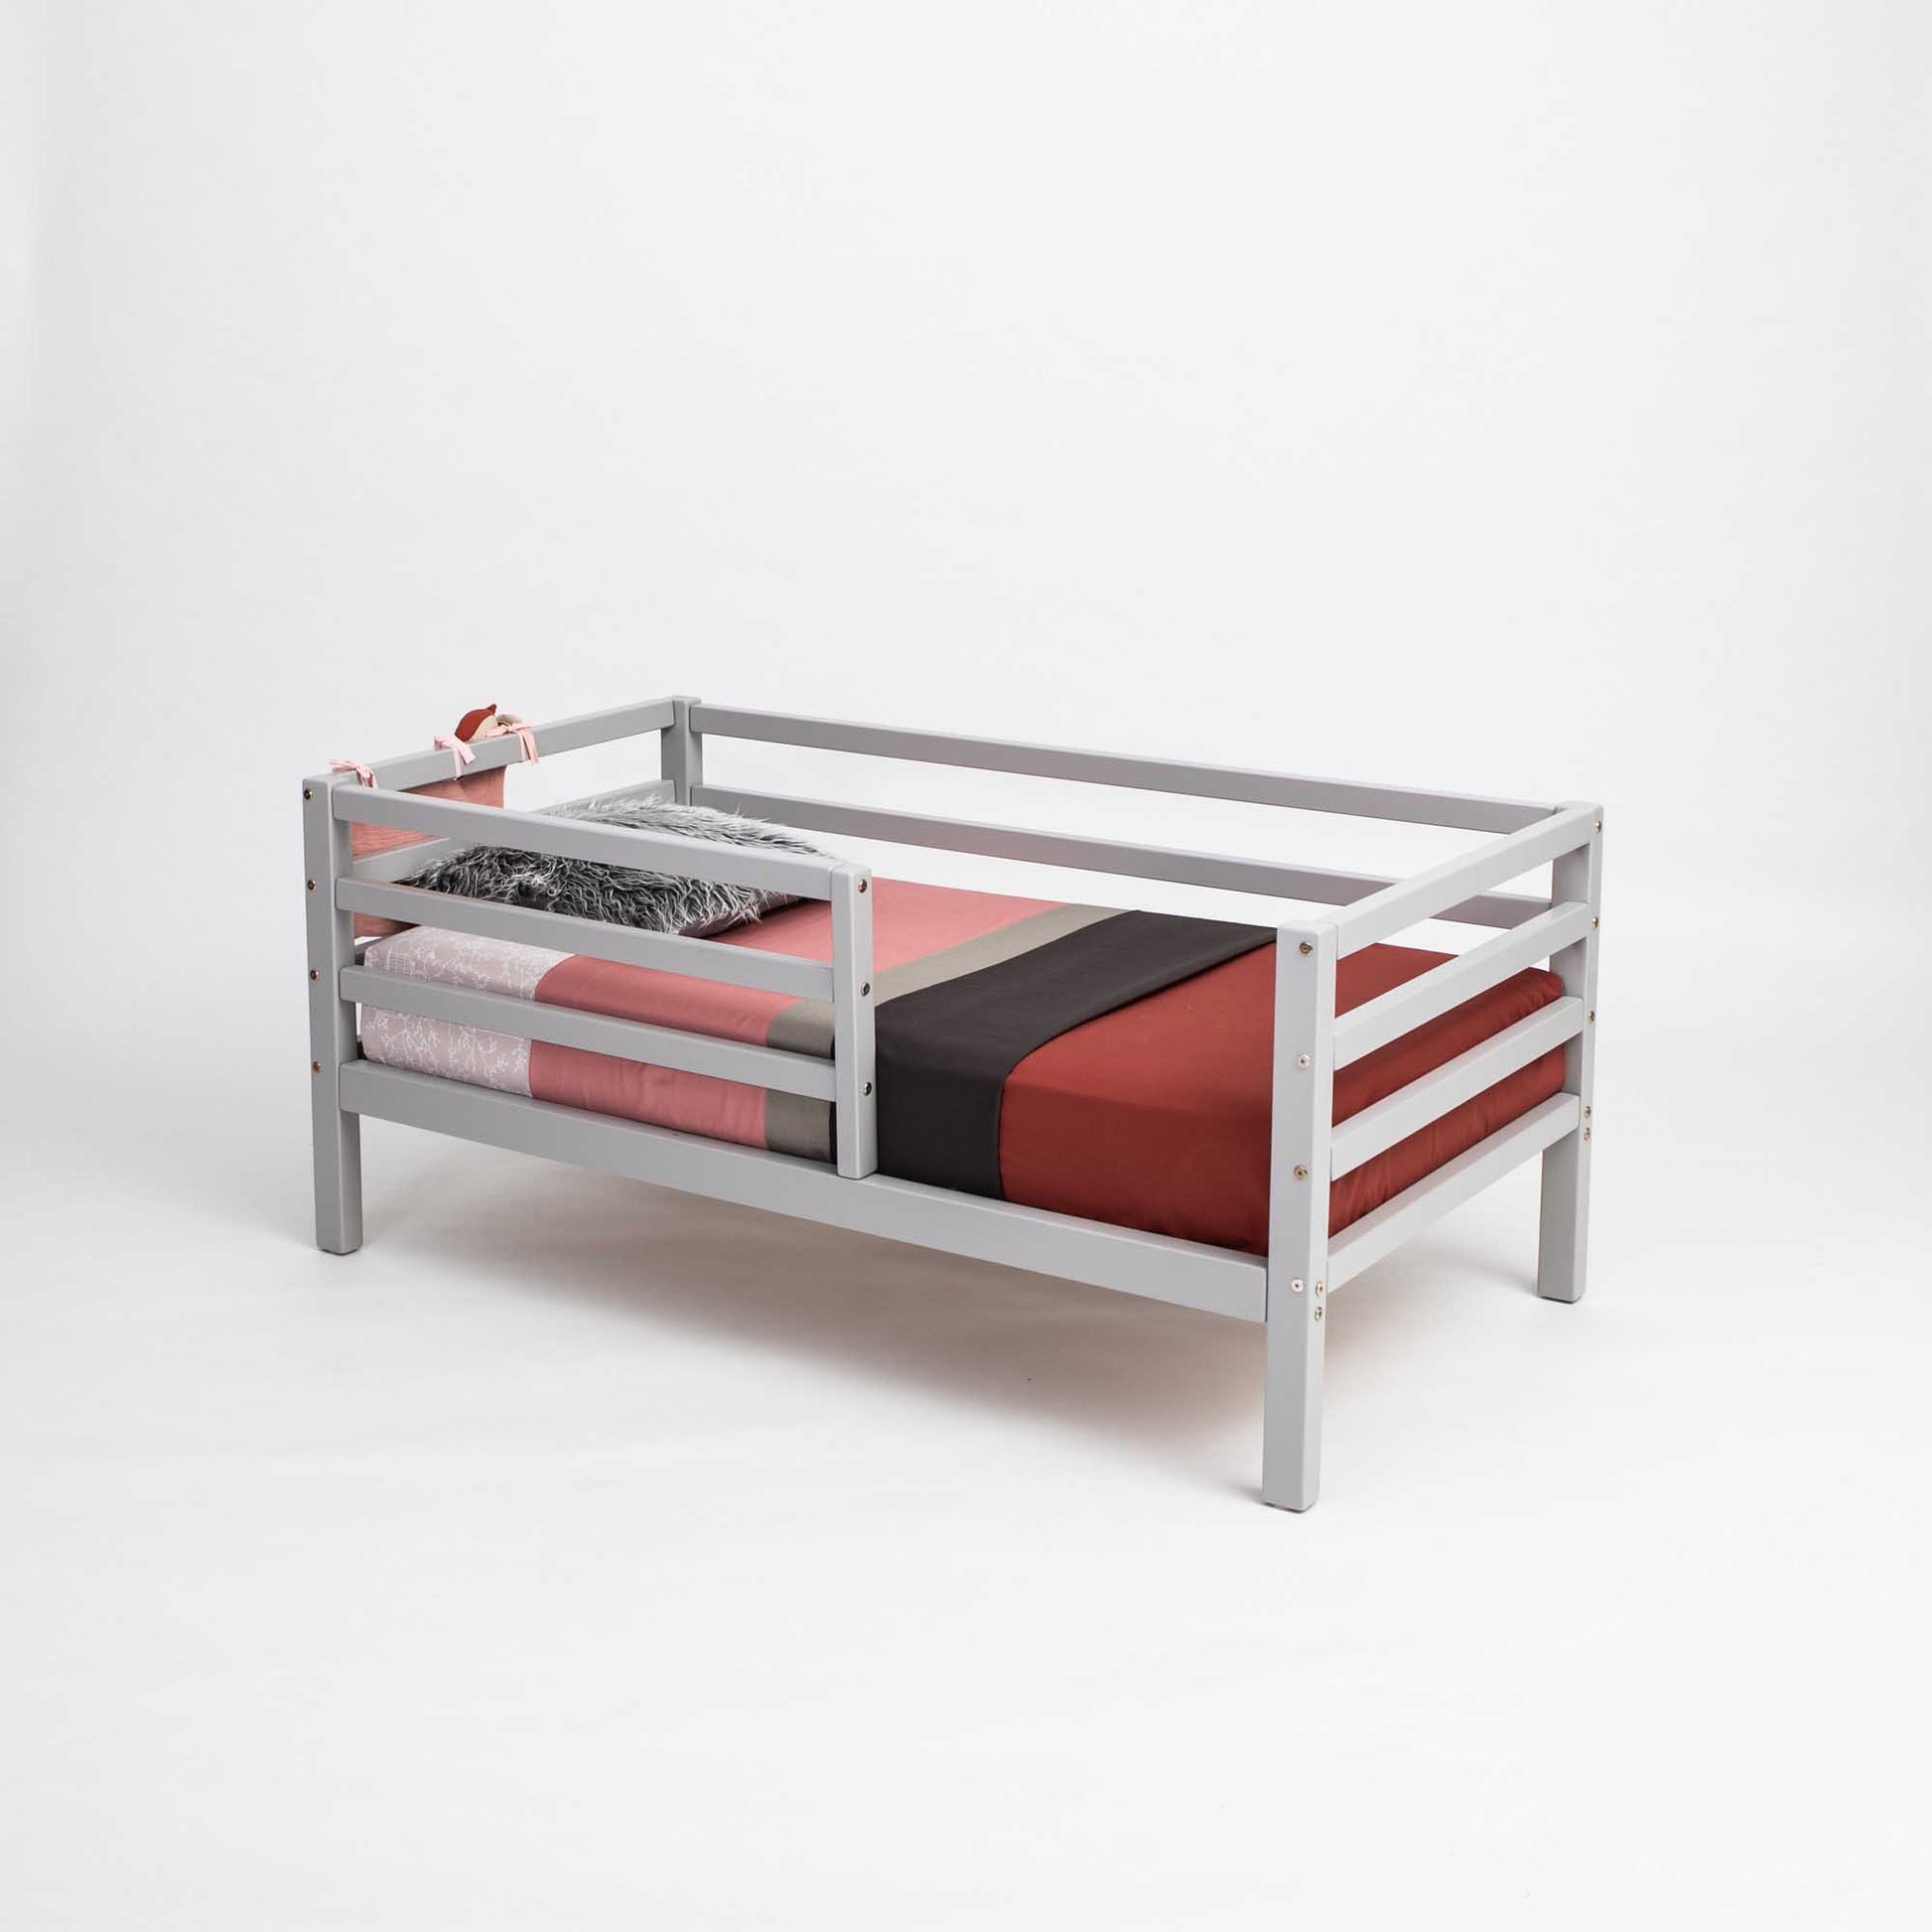 A Sweet Home From Wood kids' bed on legs with a horizontal rail fence, suitable for boys, with a red and black sheet.